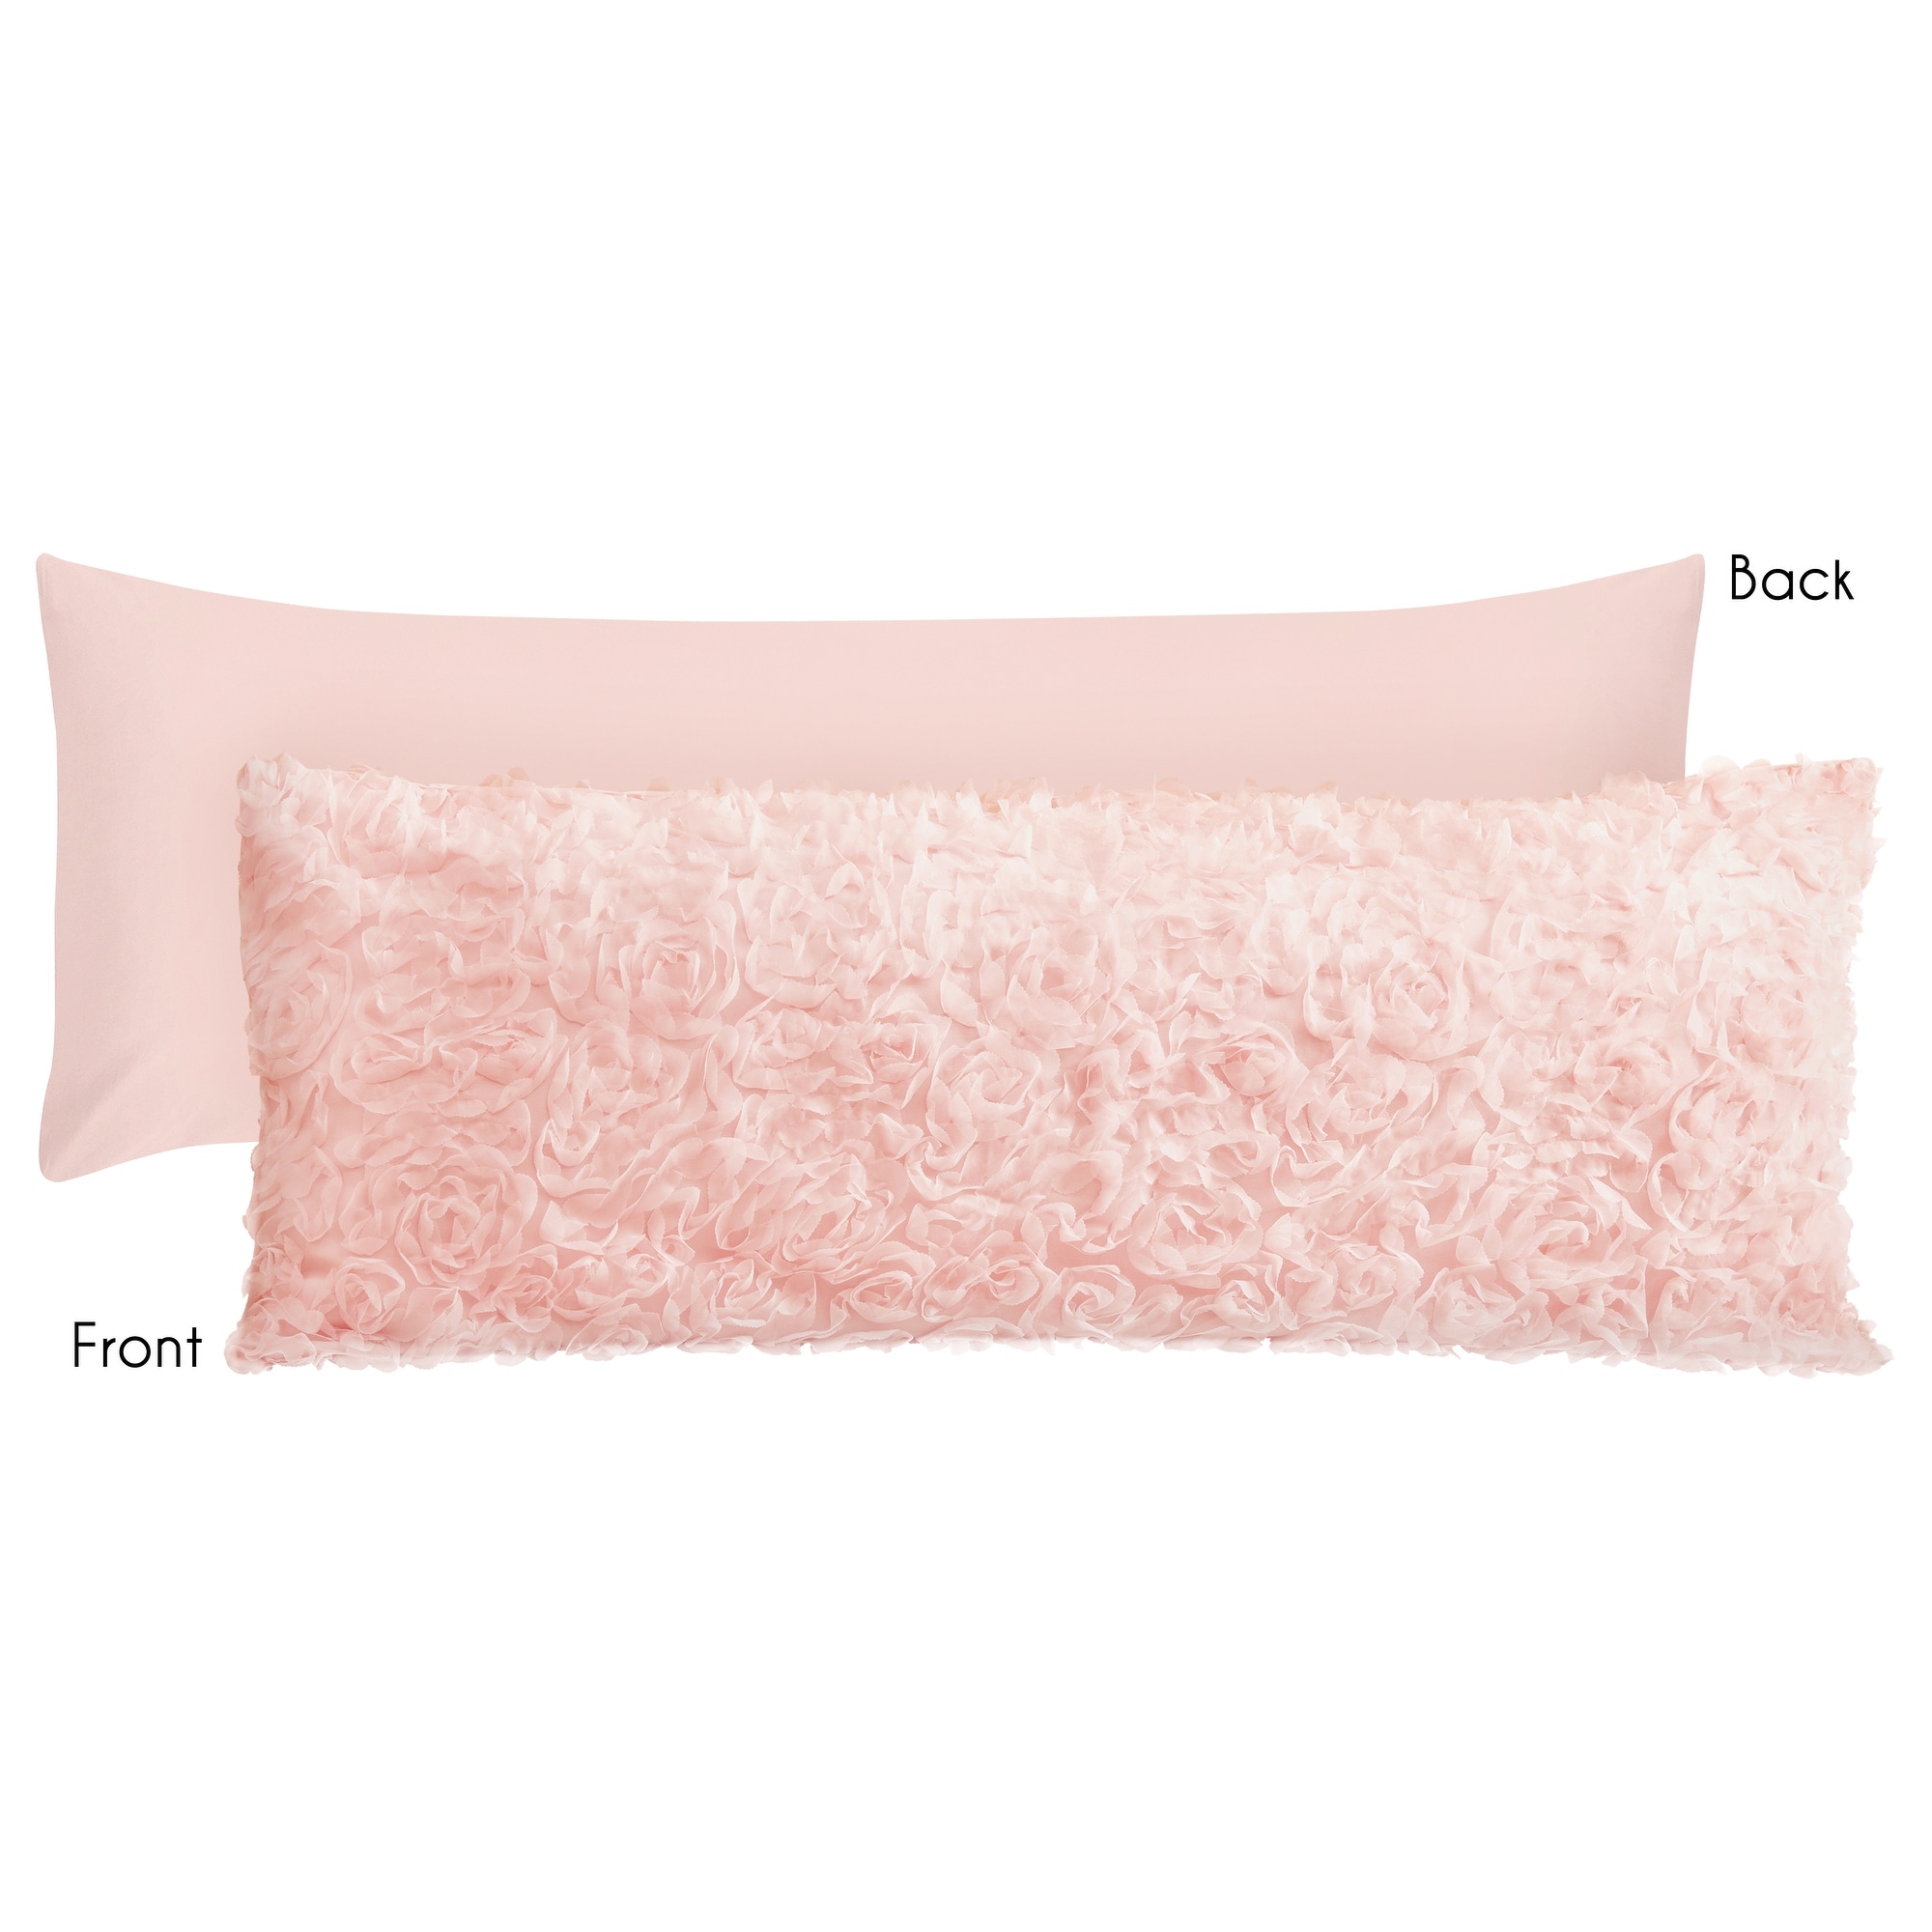 https://ak1.ostkcdn.com/images/products/is/images/direct/b7badf1639cde5b2eb6997f22ffaa518f6275a31/Pink-Floral-Rose-Body-Pillow-Case-%28Pillow-Not-Included%29---Solid-Blush-Flower-Luxurious-Elegant-Princess-Vintage-Boho-Shabby-Chic.jpg